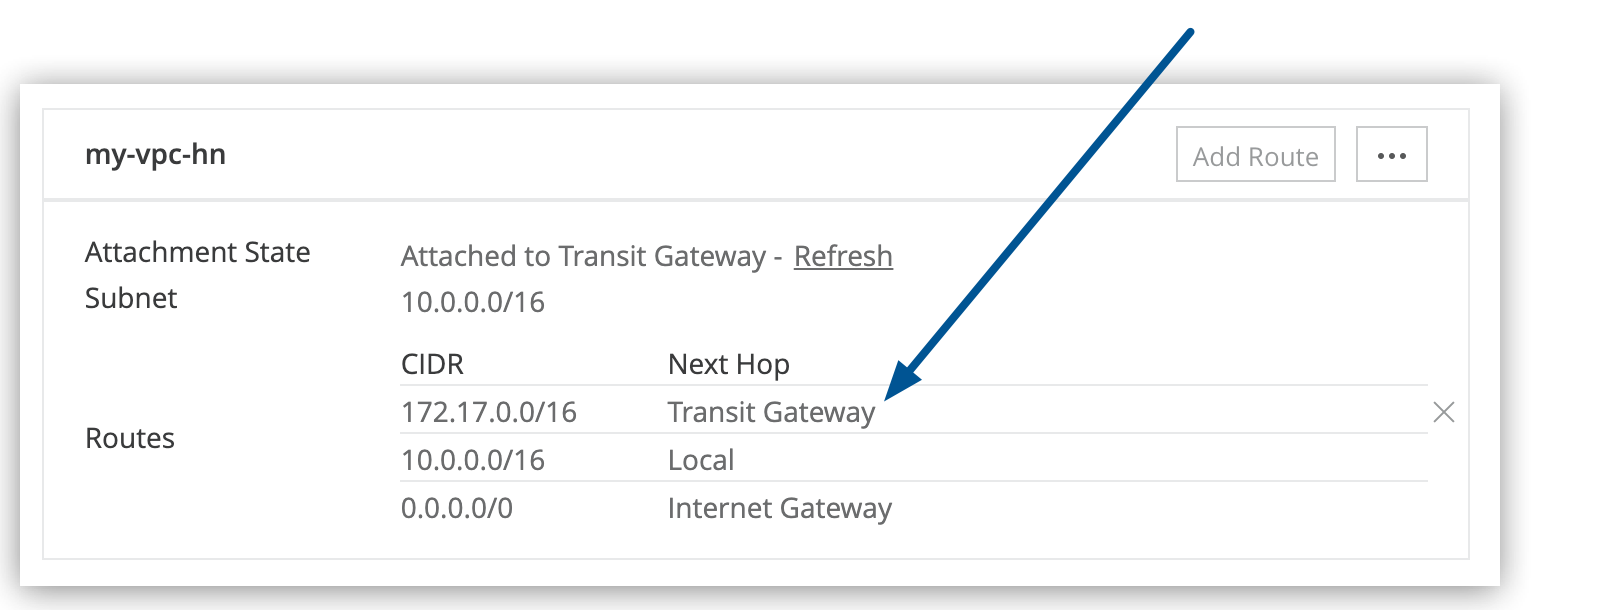 Transit Gateway in the Next Hop column of the route table